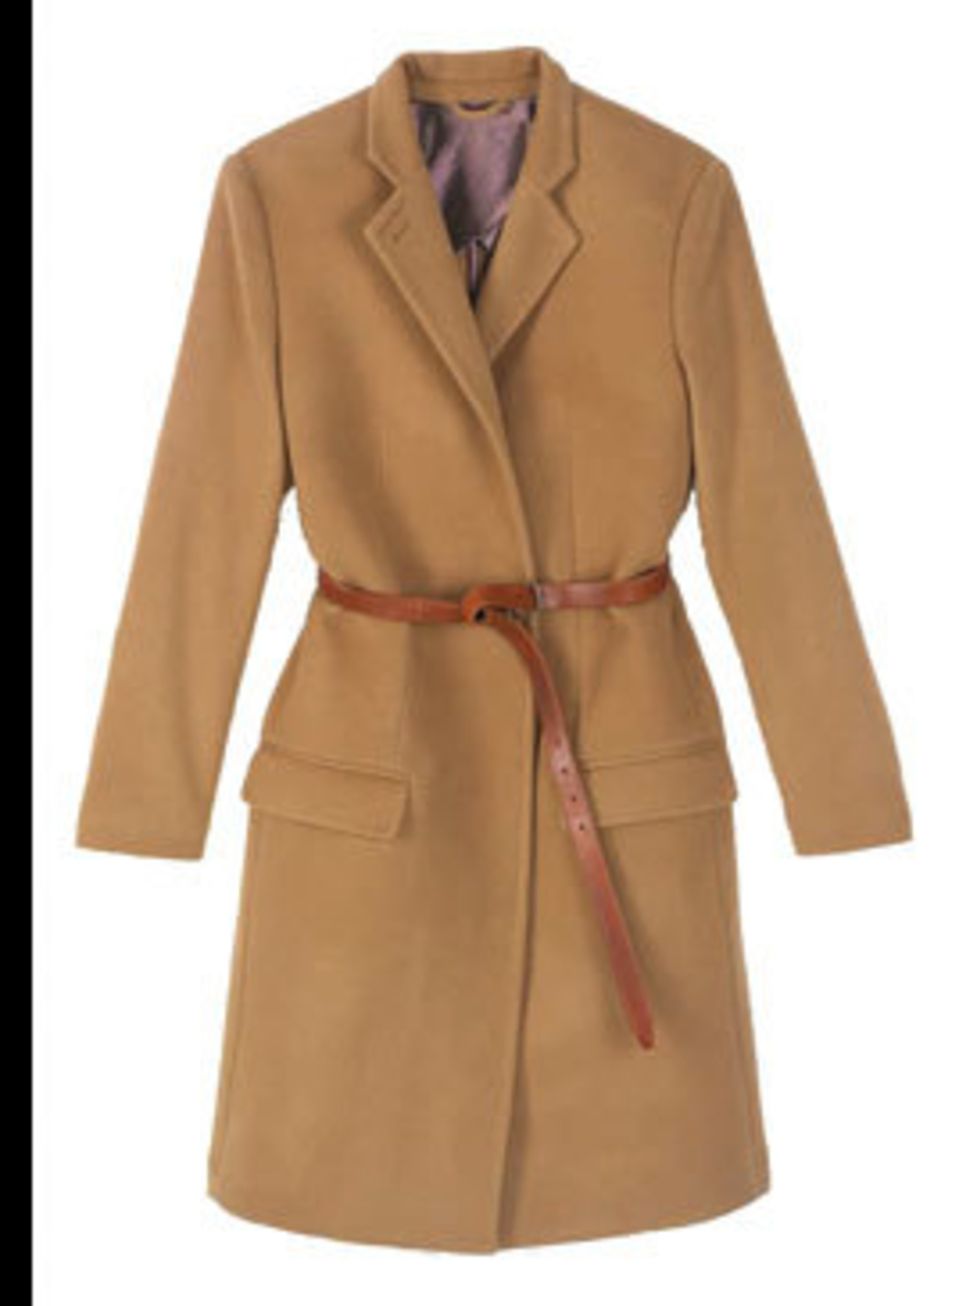 <p>Camel coat with brown leather belt, £310, by <a href="http://www.acnestudios.com/">Acne</a></p>